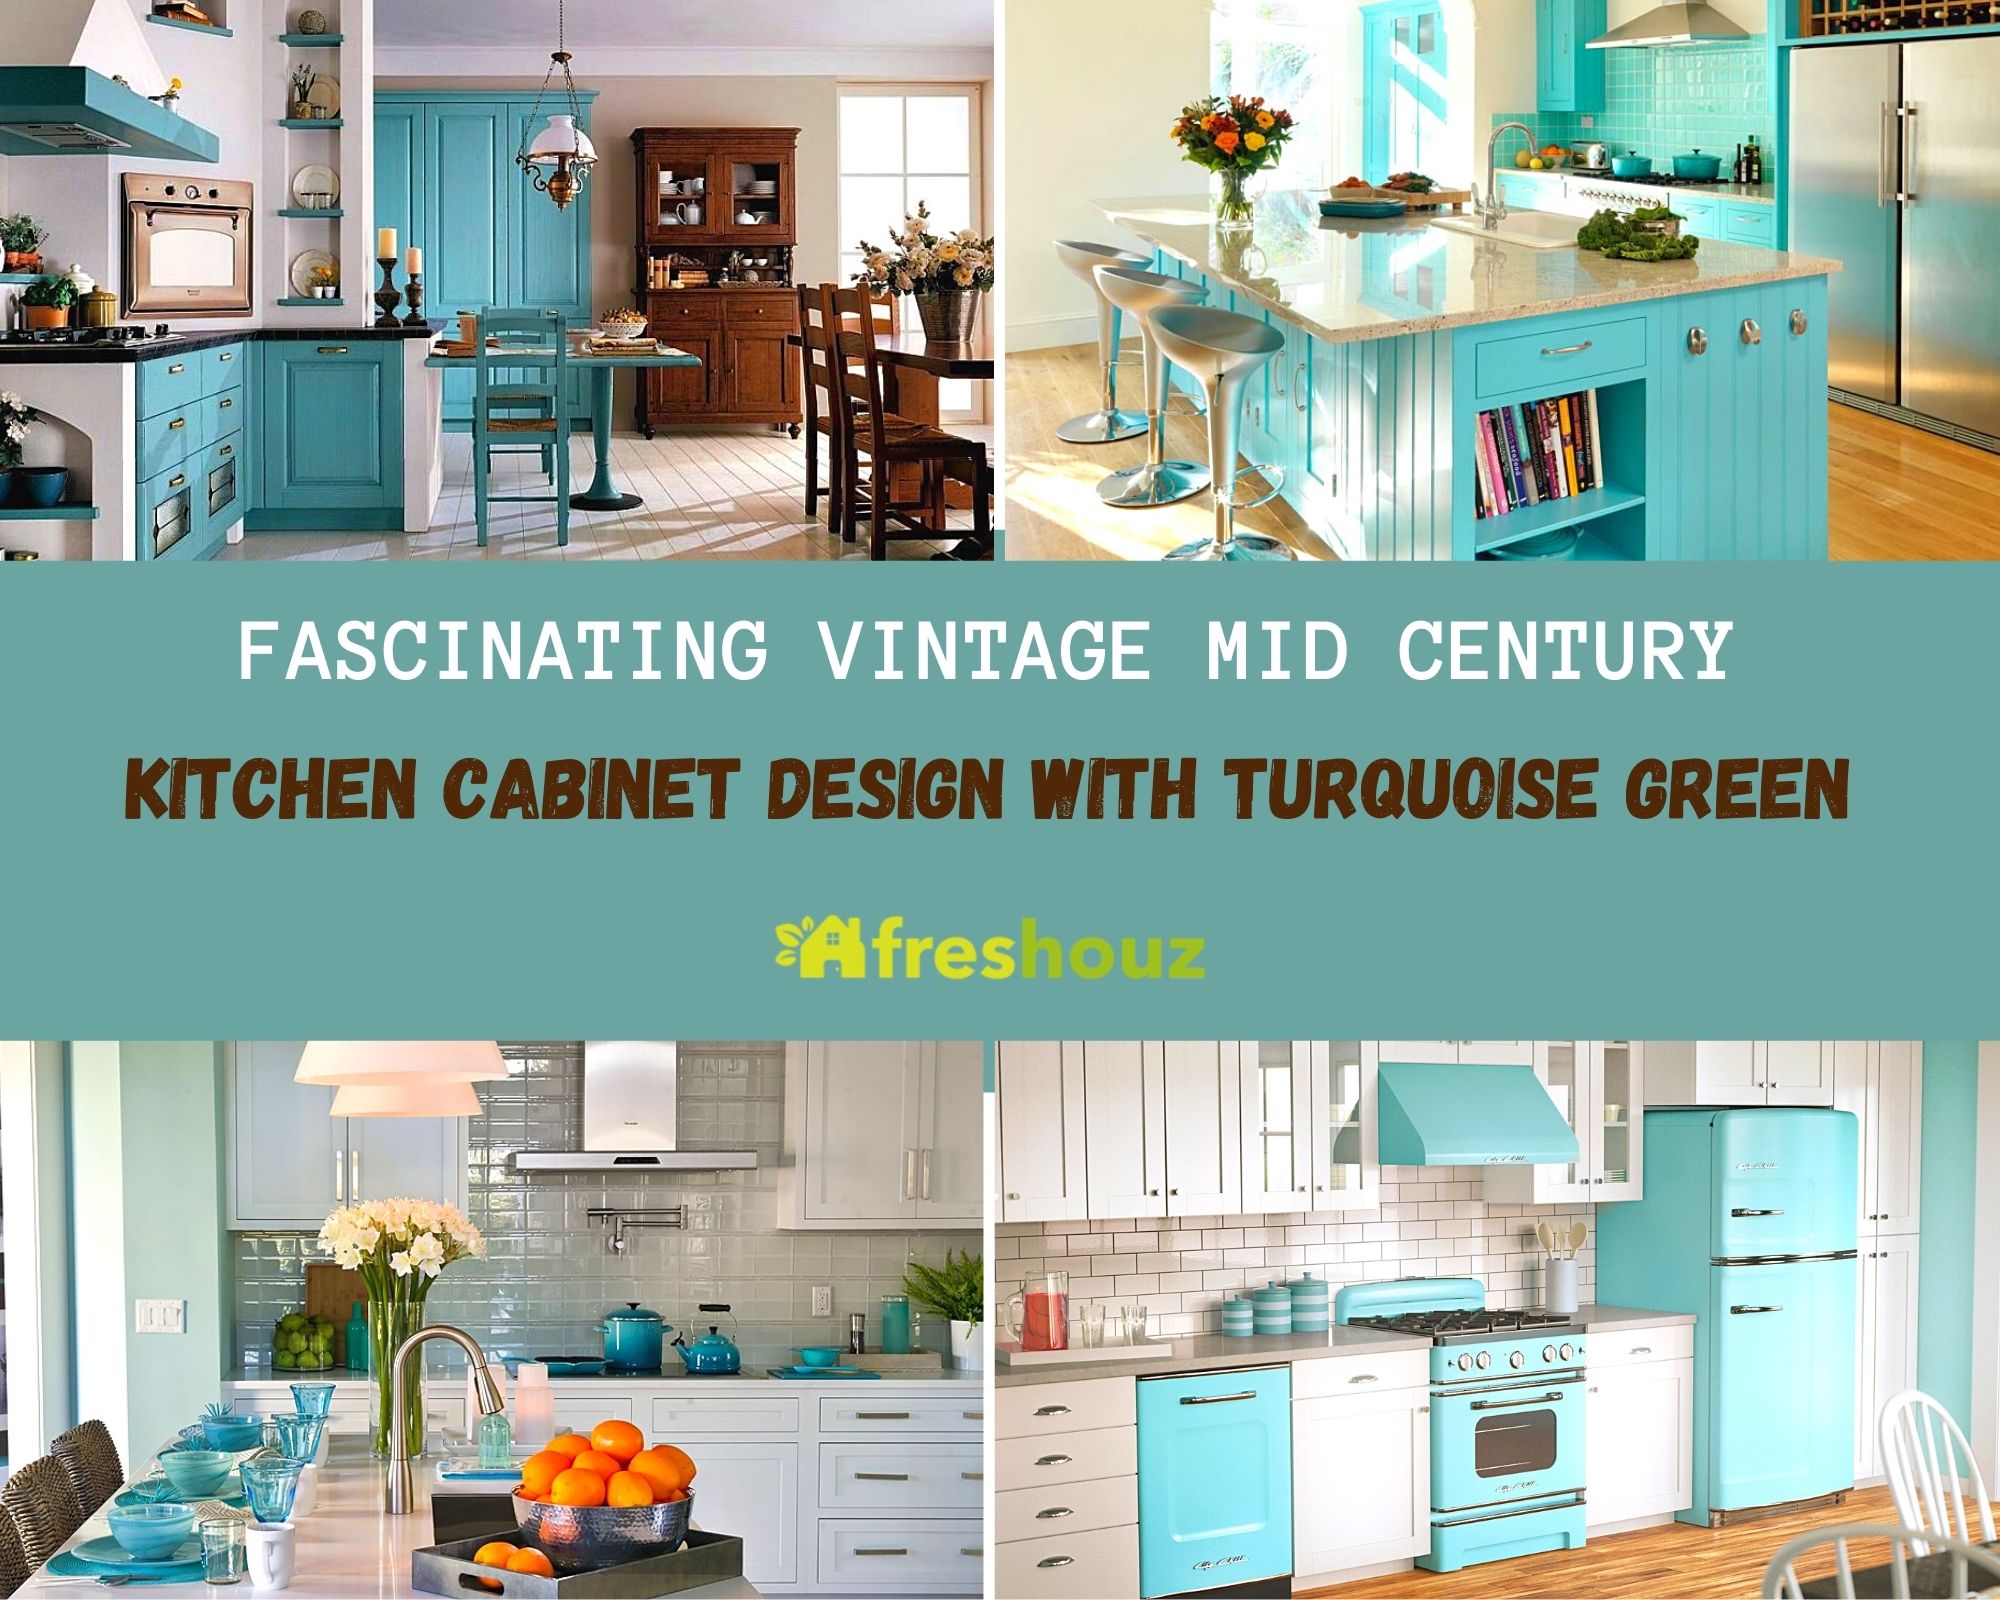 Fascinating Vintage Mid Century Kitchen Cabinet Design With Turquoise Green